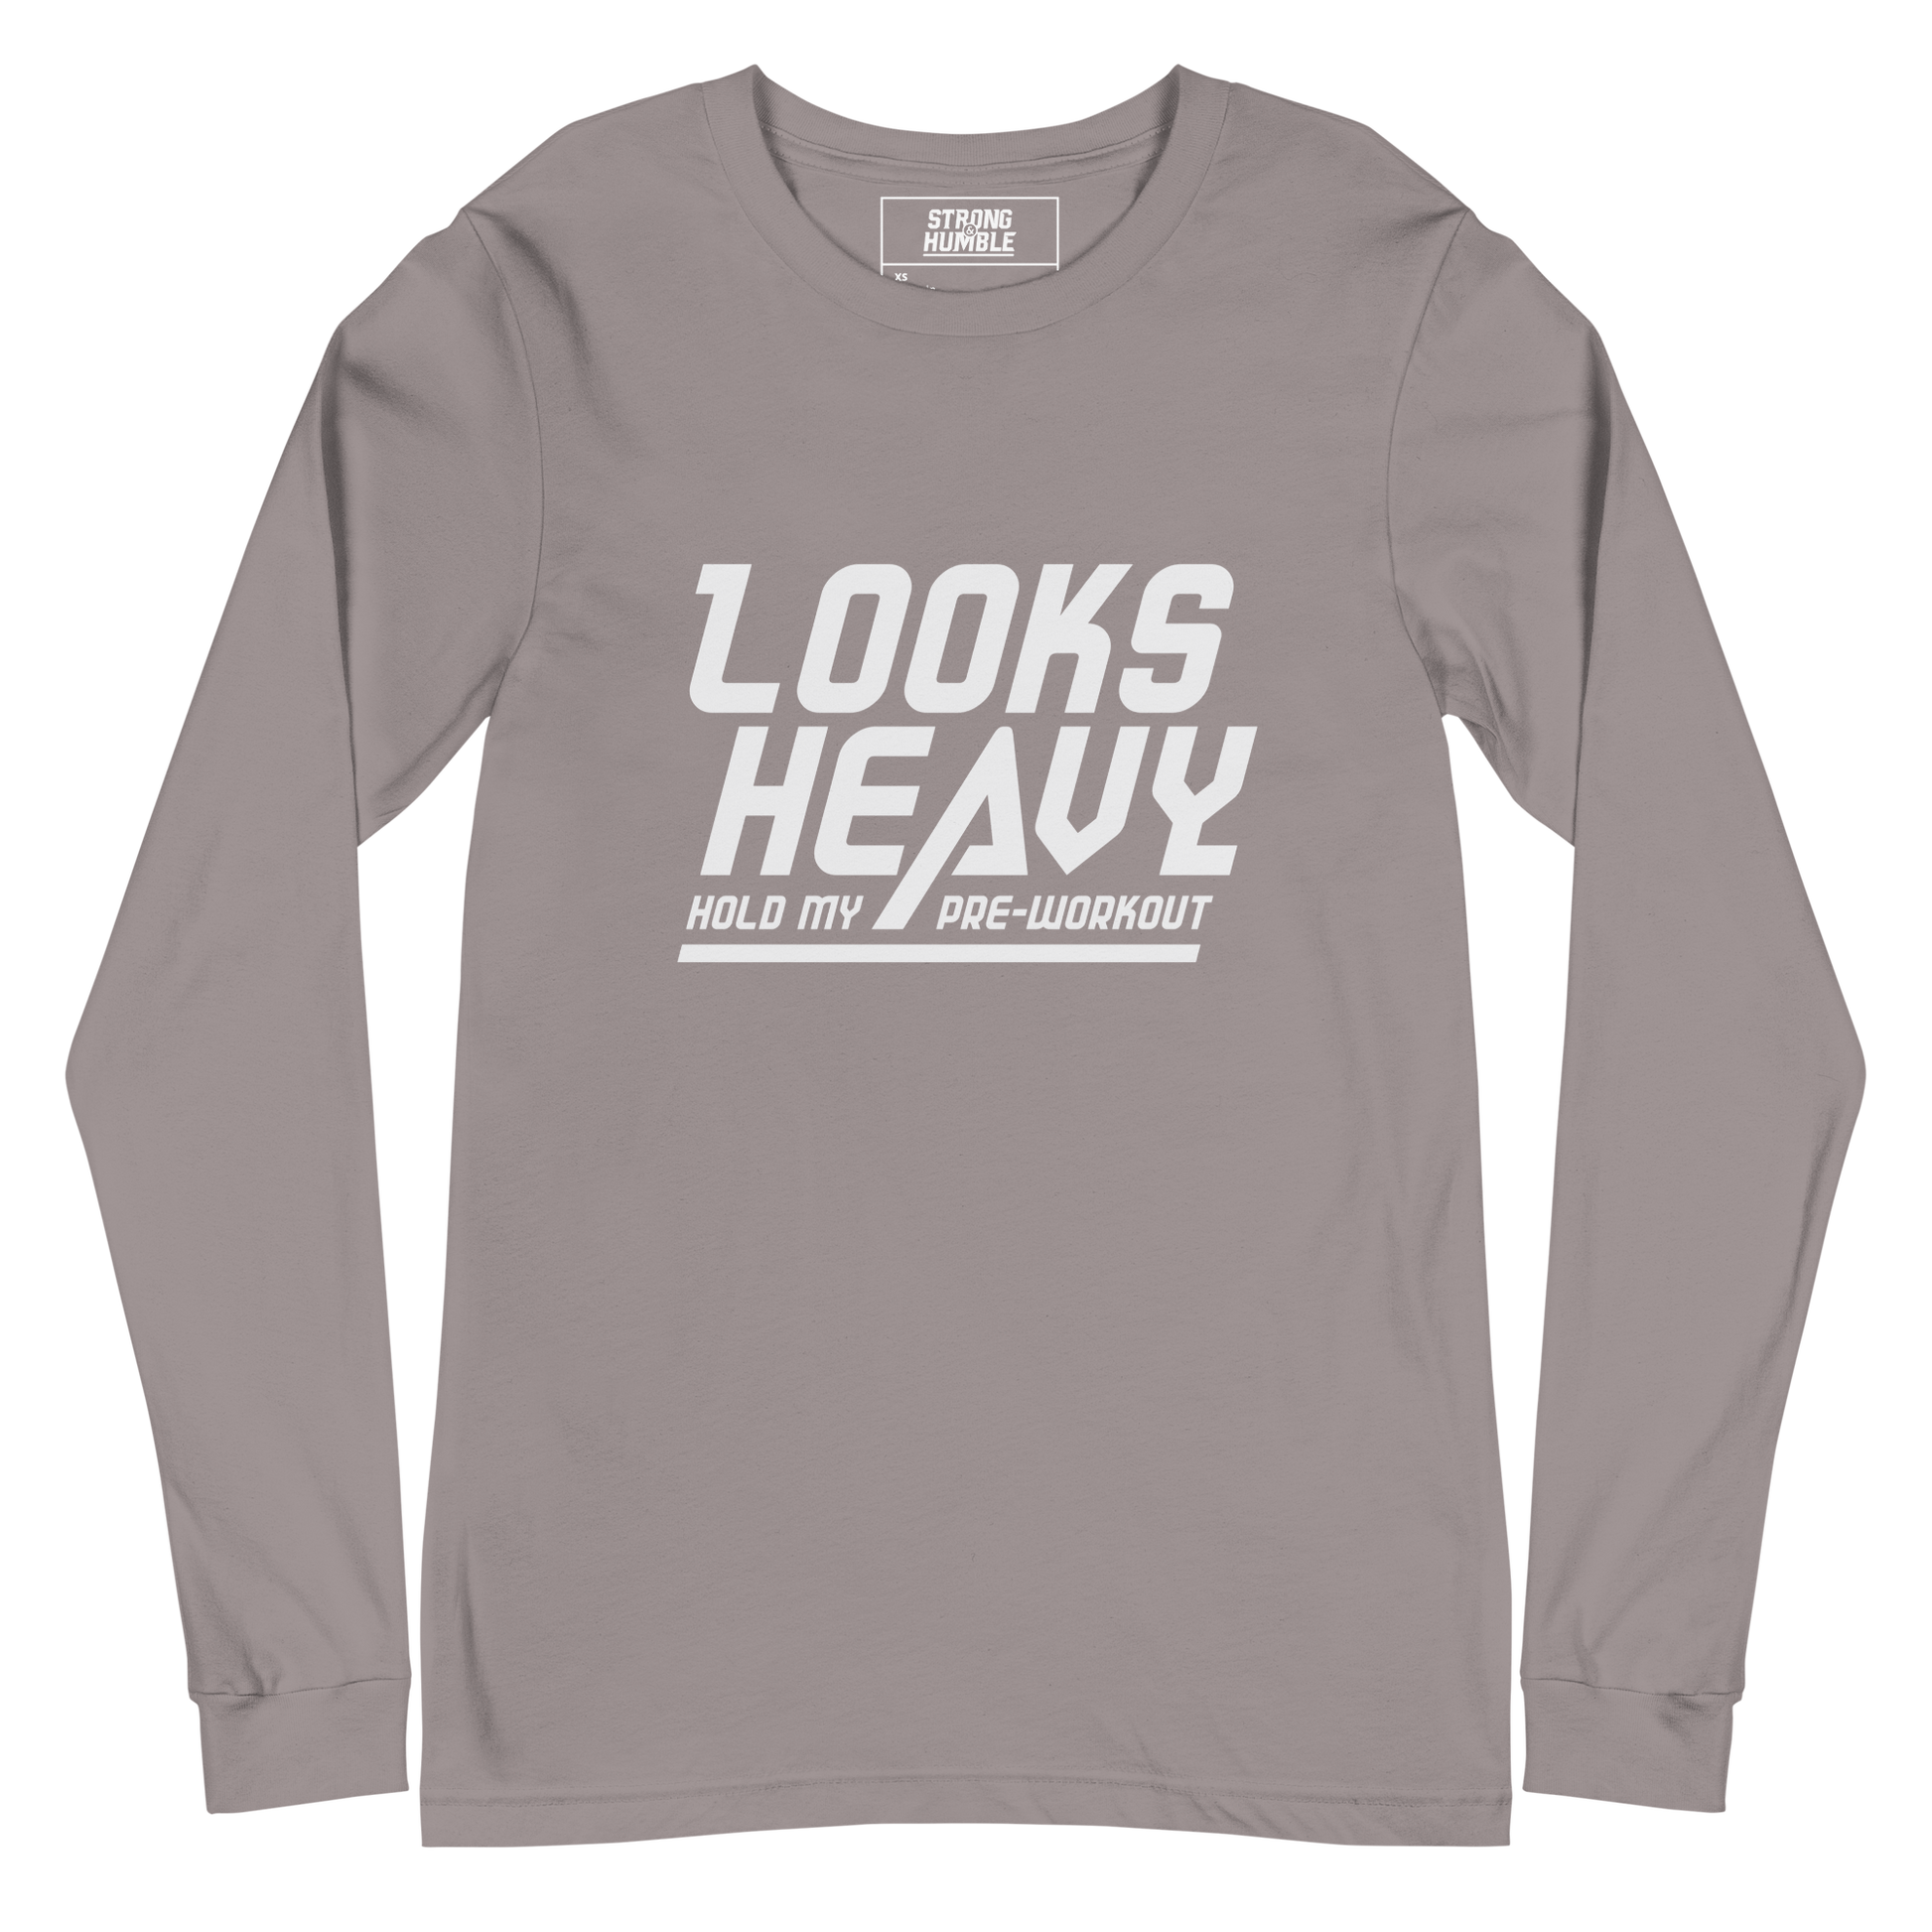 Looks Heavy - Hold My Pre-workout Long Sleeve Tee  - Strong and Humble Apparel